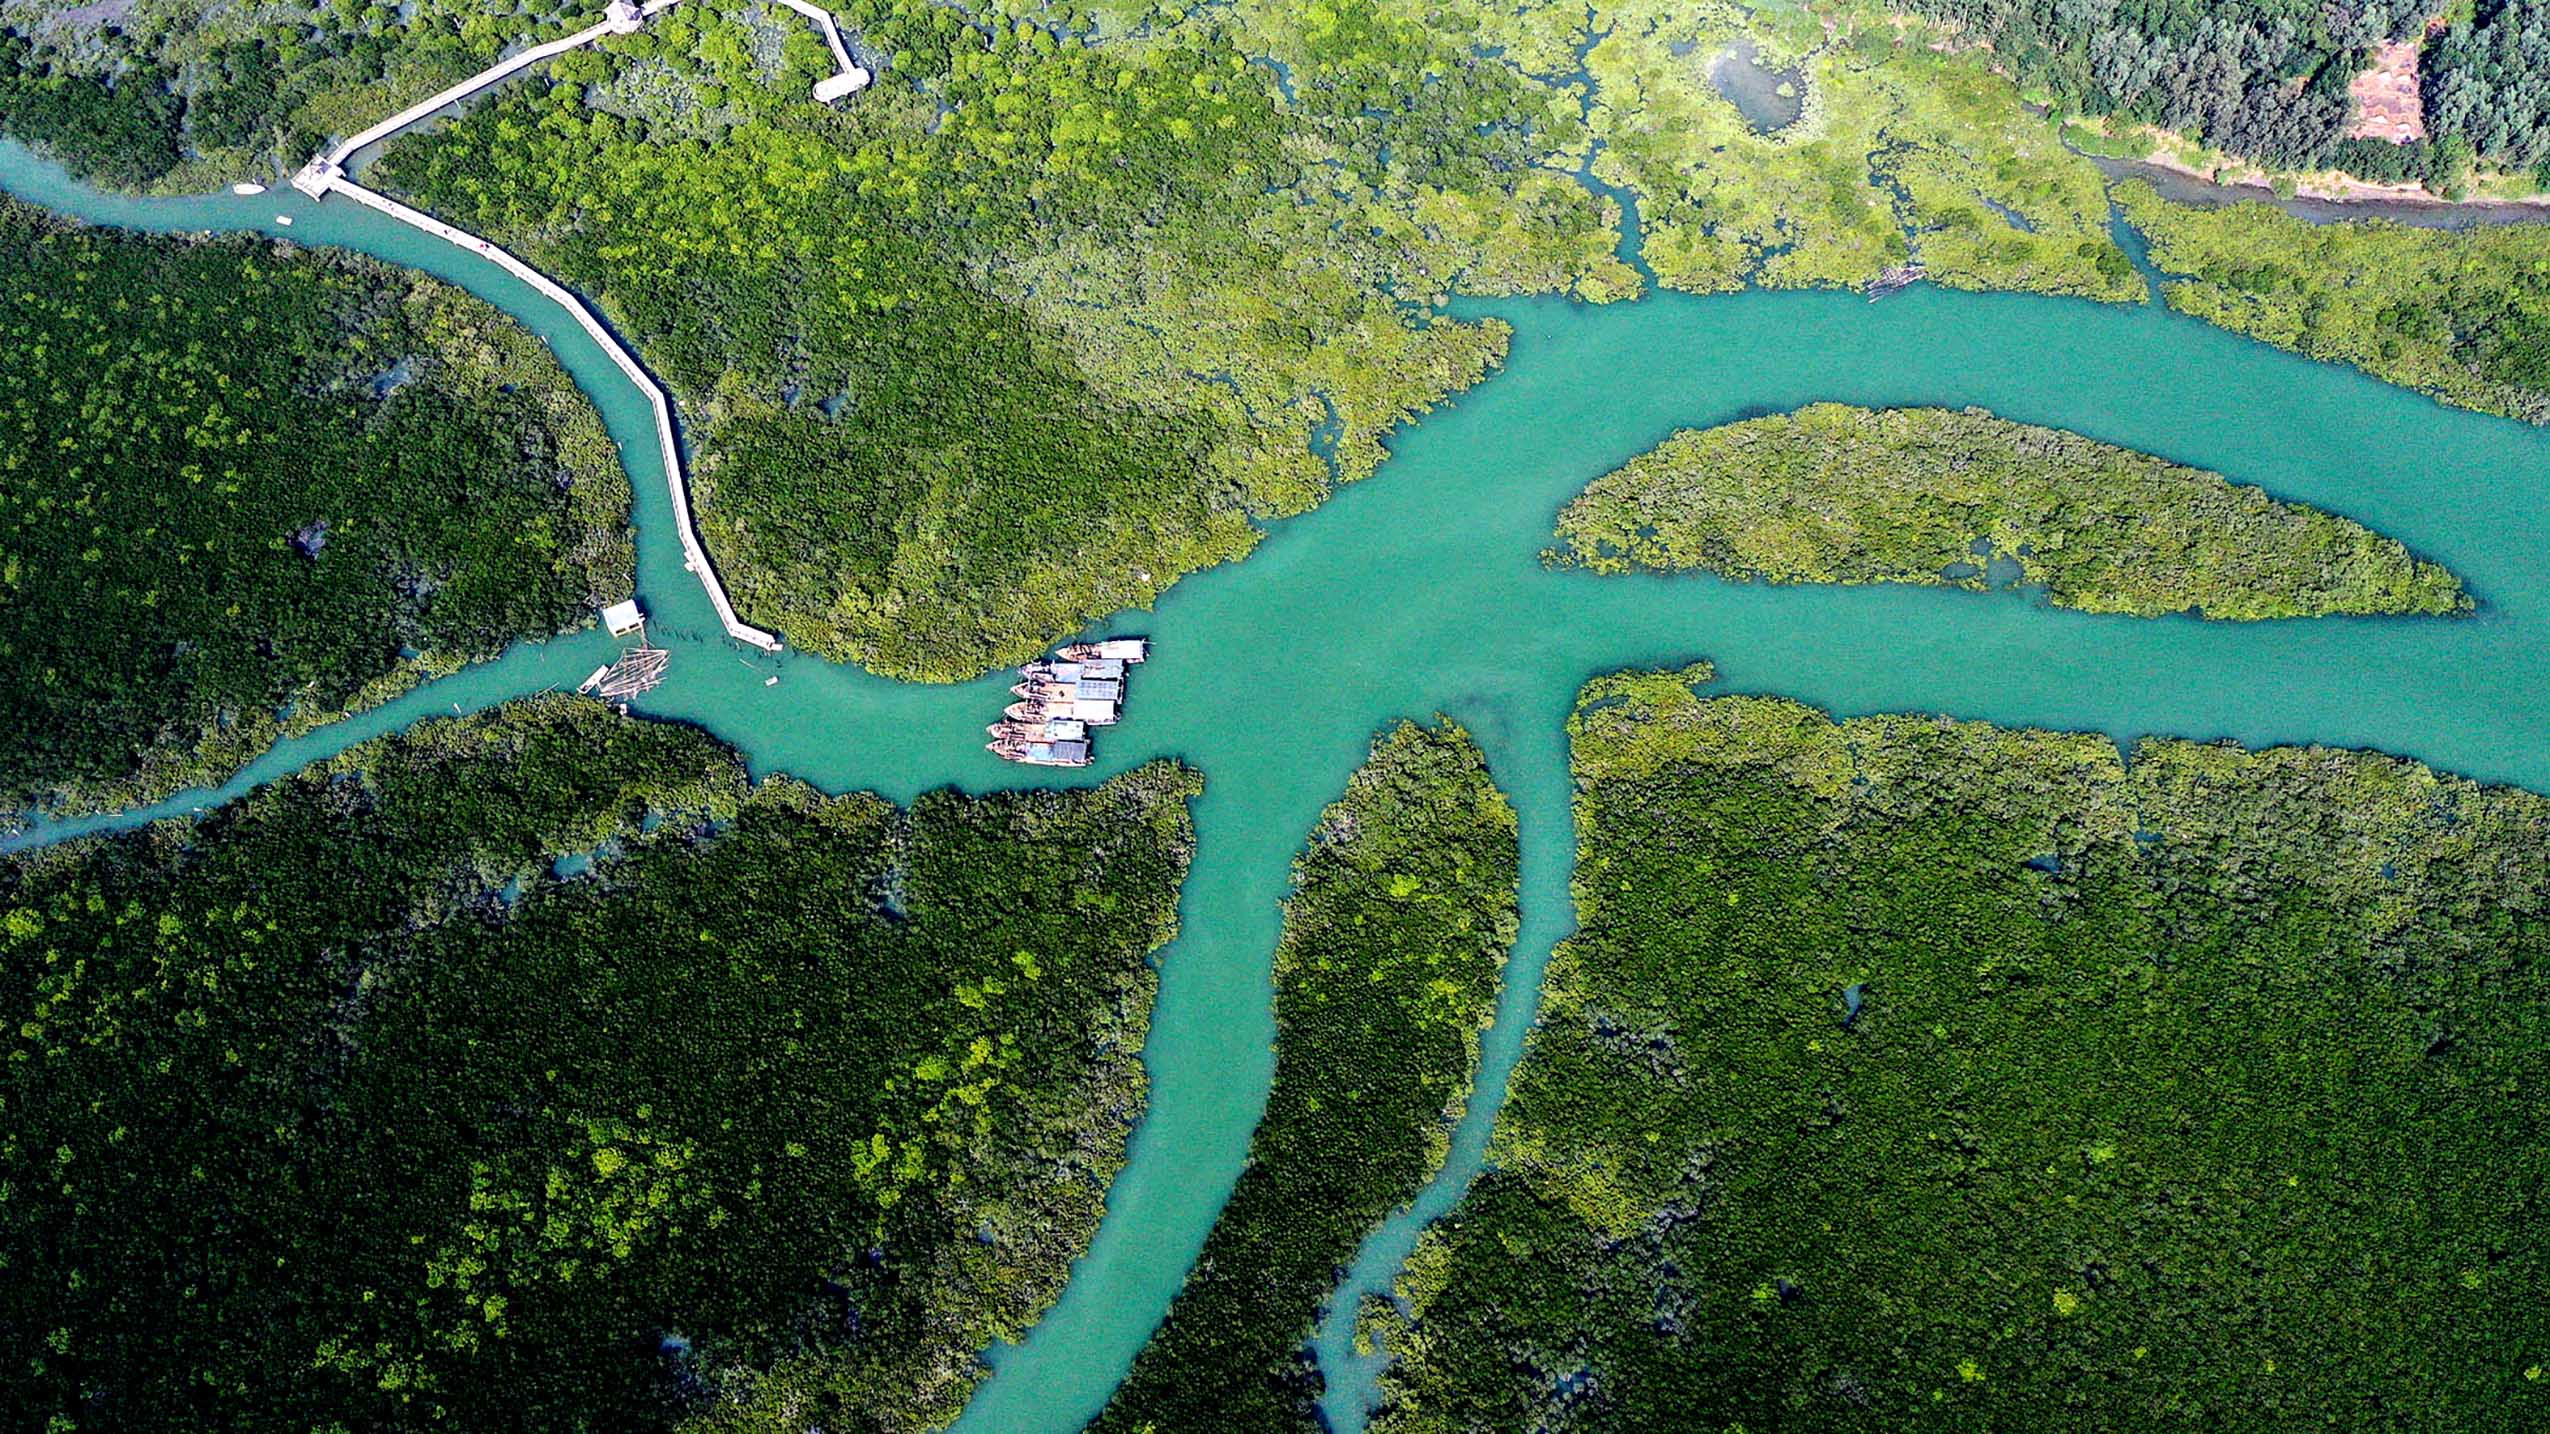 This aerial photo taken on Oct. 22, 2022 shows the scenery of Shankou Mangrove Nature Reserve in Hepu County of Beihai City, south China's Guangxi Zhuang Autonomous Region. The Shankou Mangrove Nature Reserve, a wetland reserve protecting the ecosystem of the mangrove forest, has been designated as a wetland of international importance in China. (Xinhua/Zhang Ailin)